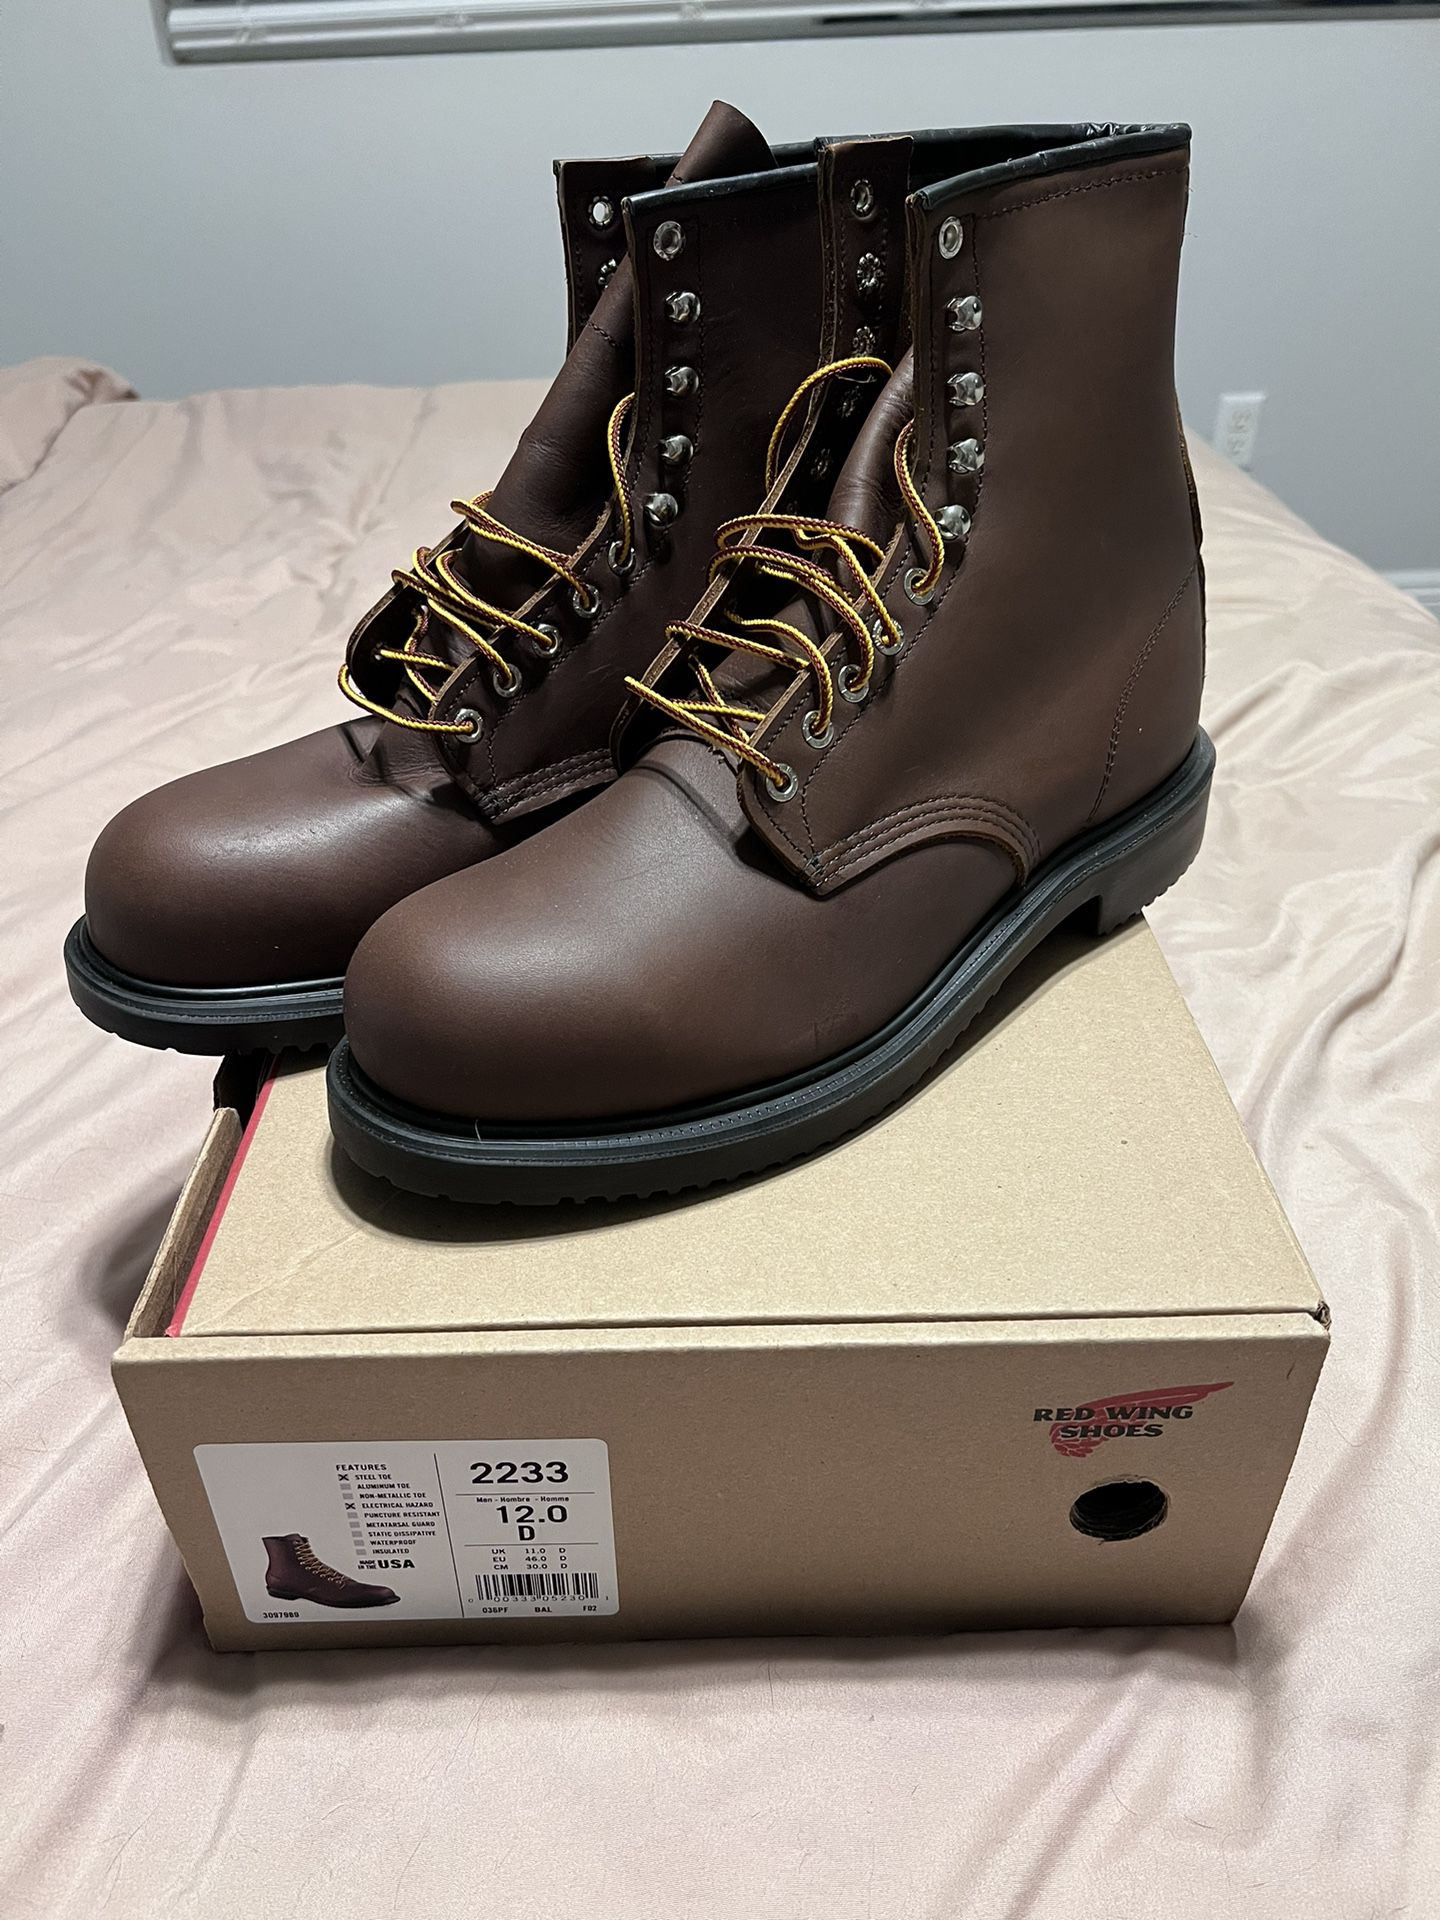 Brand New Red Wing Boots Size 12